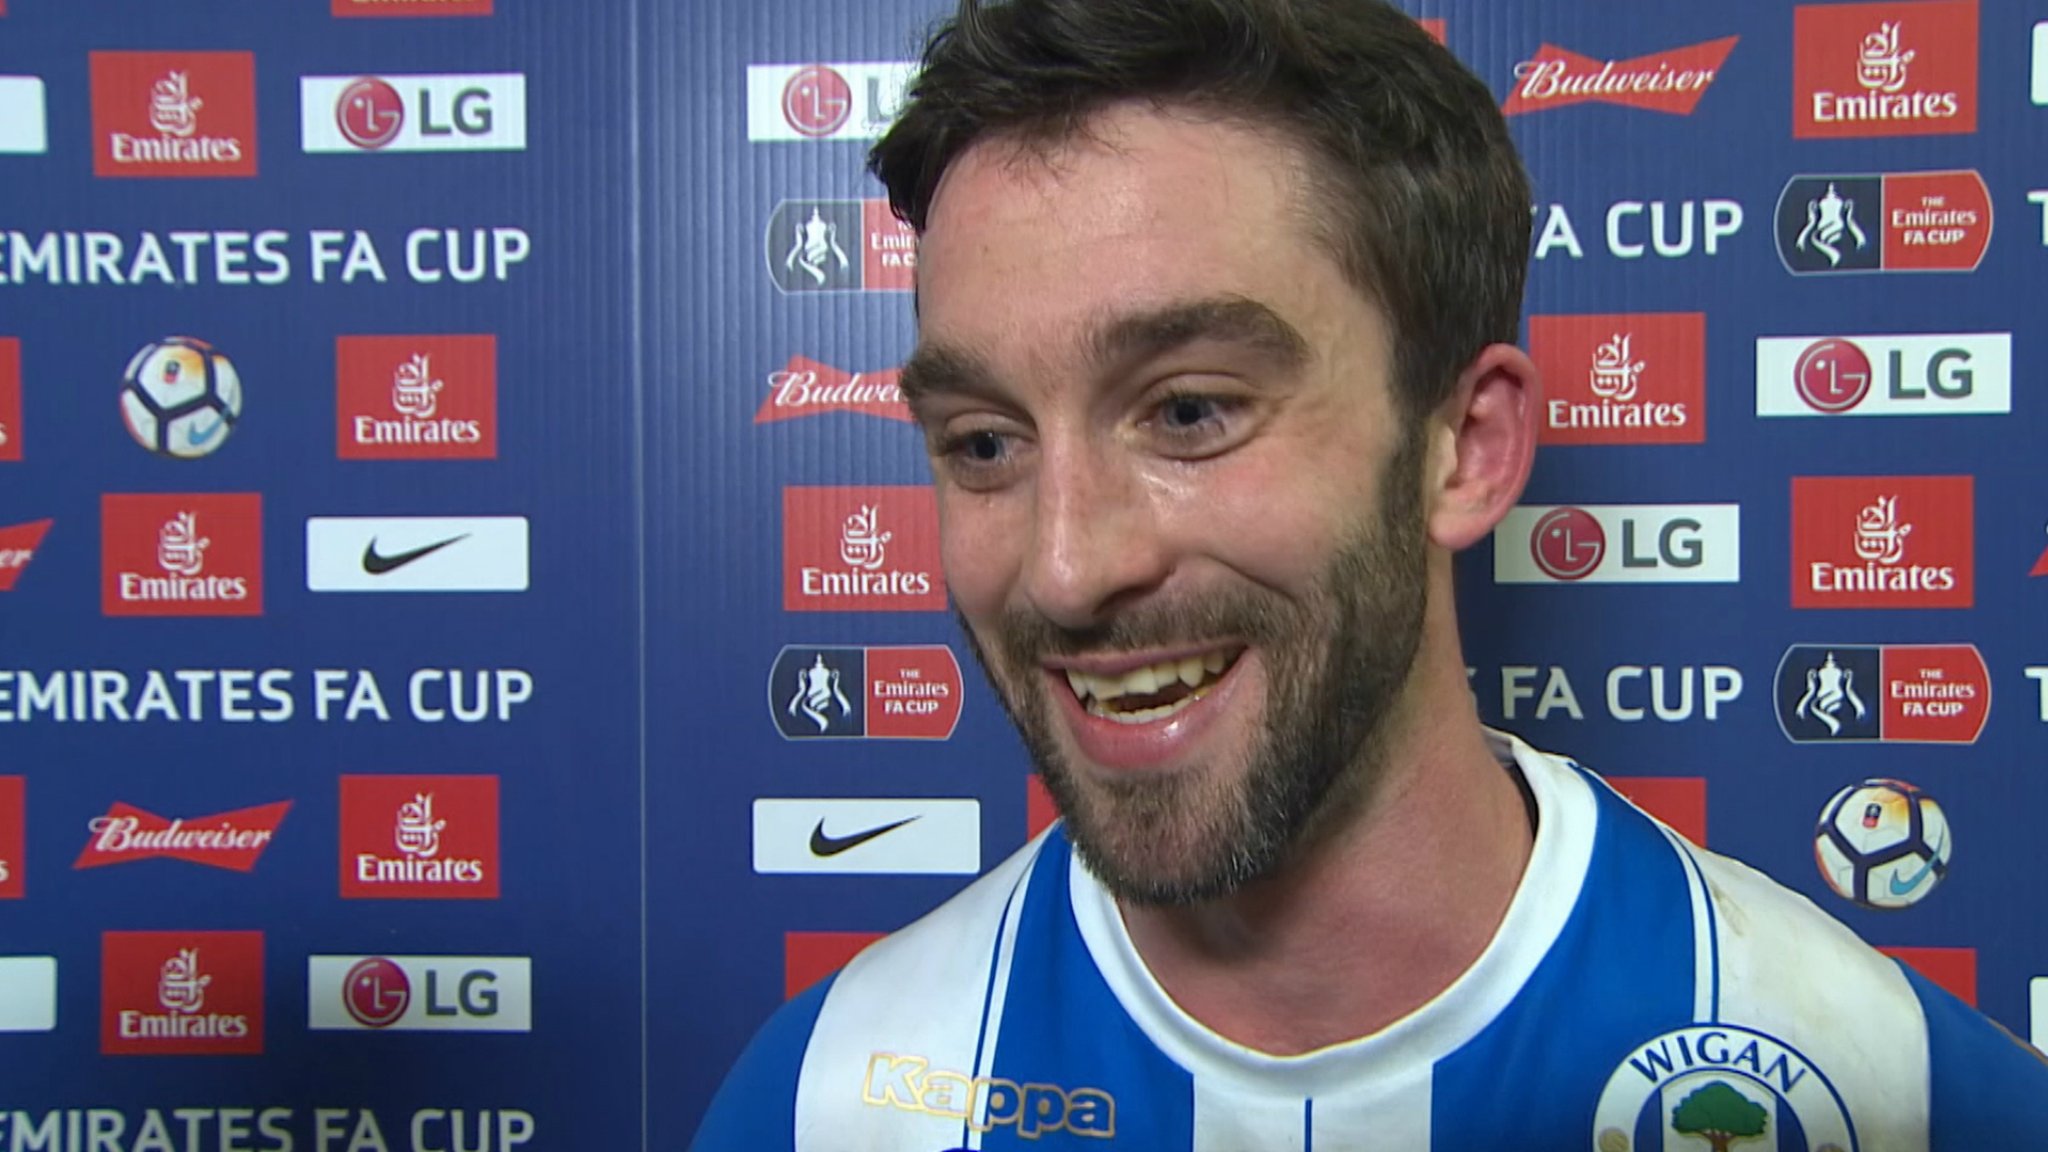 Wigan 1-0 Manchester City: Wigan striker Will Grigg and manager Paul Cook react to win